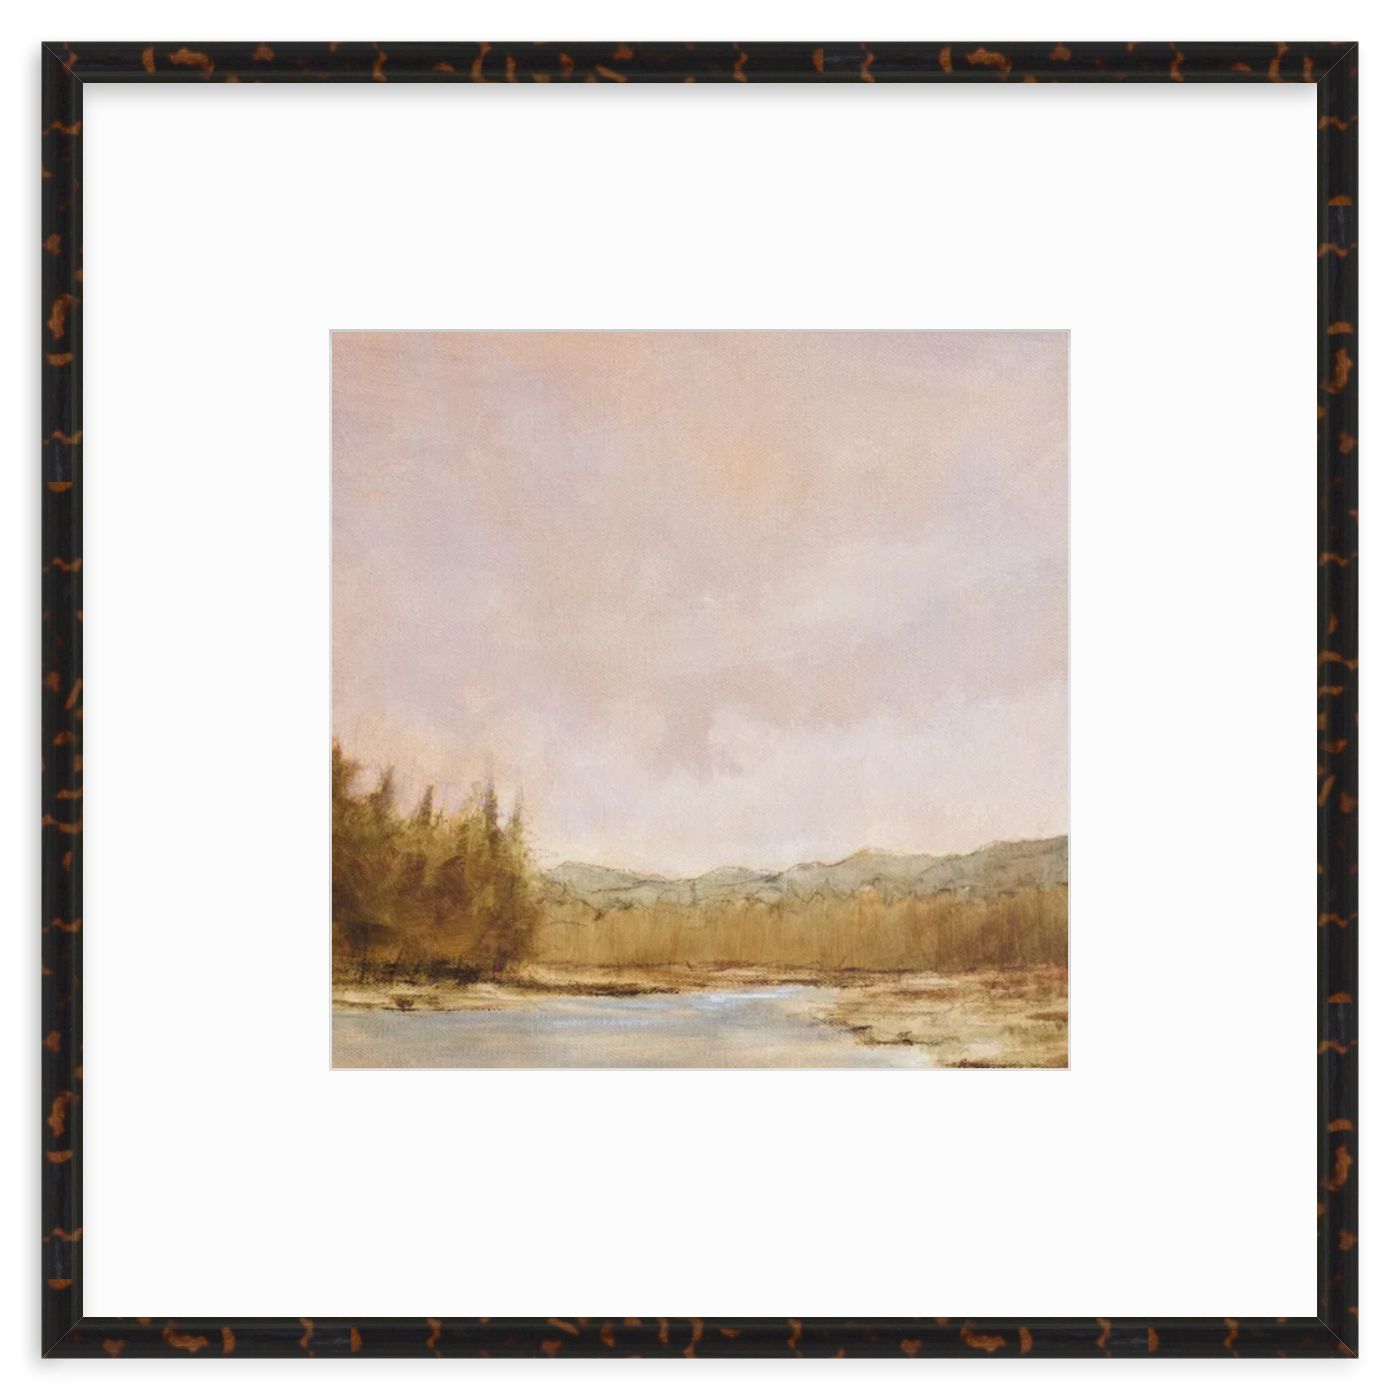 The Peace Within Us, 03, 23x23" framed print